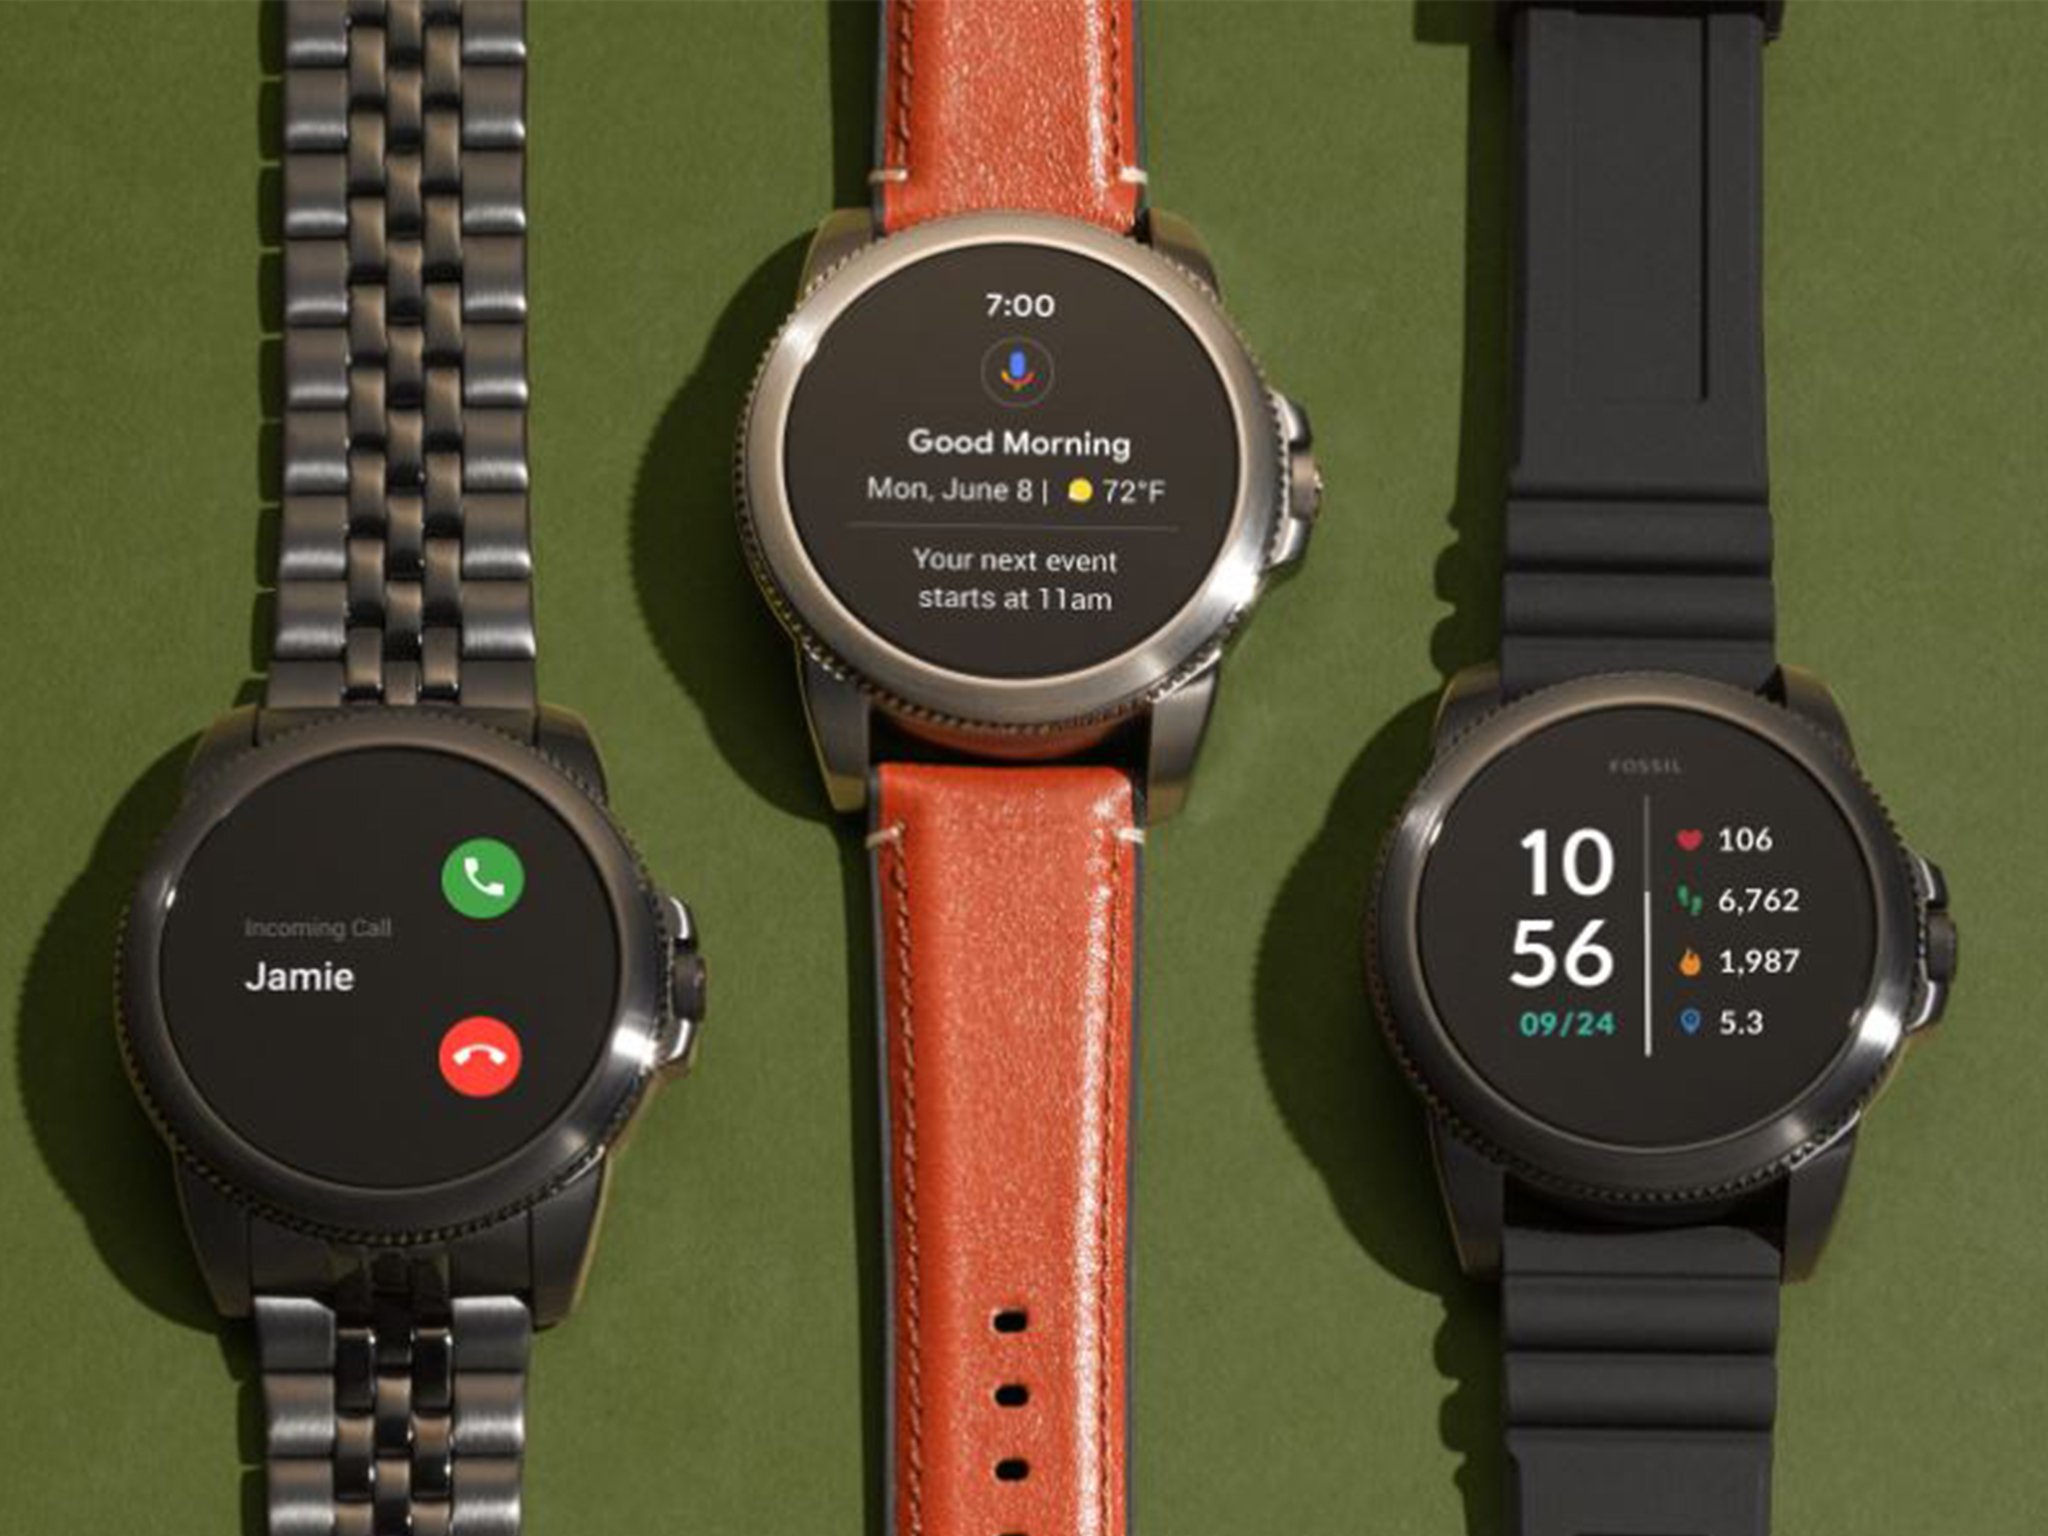 now come with the best watch face customization app Android Central